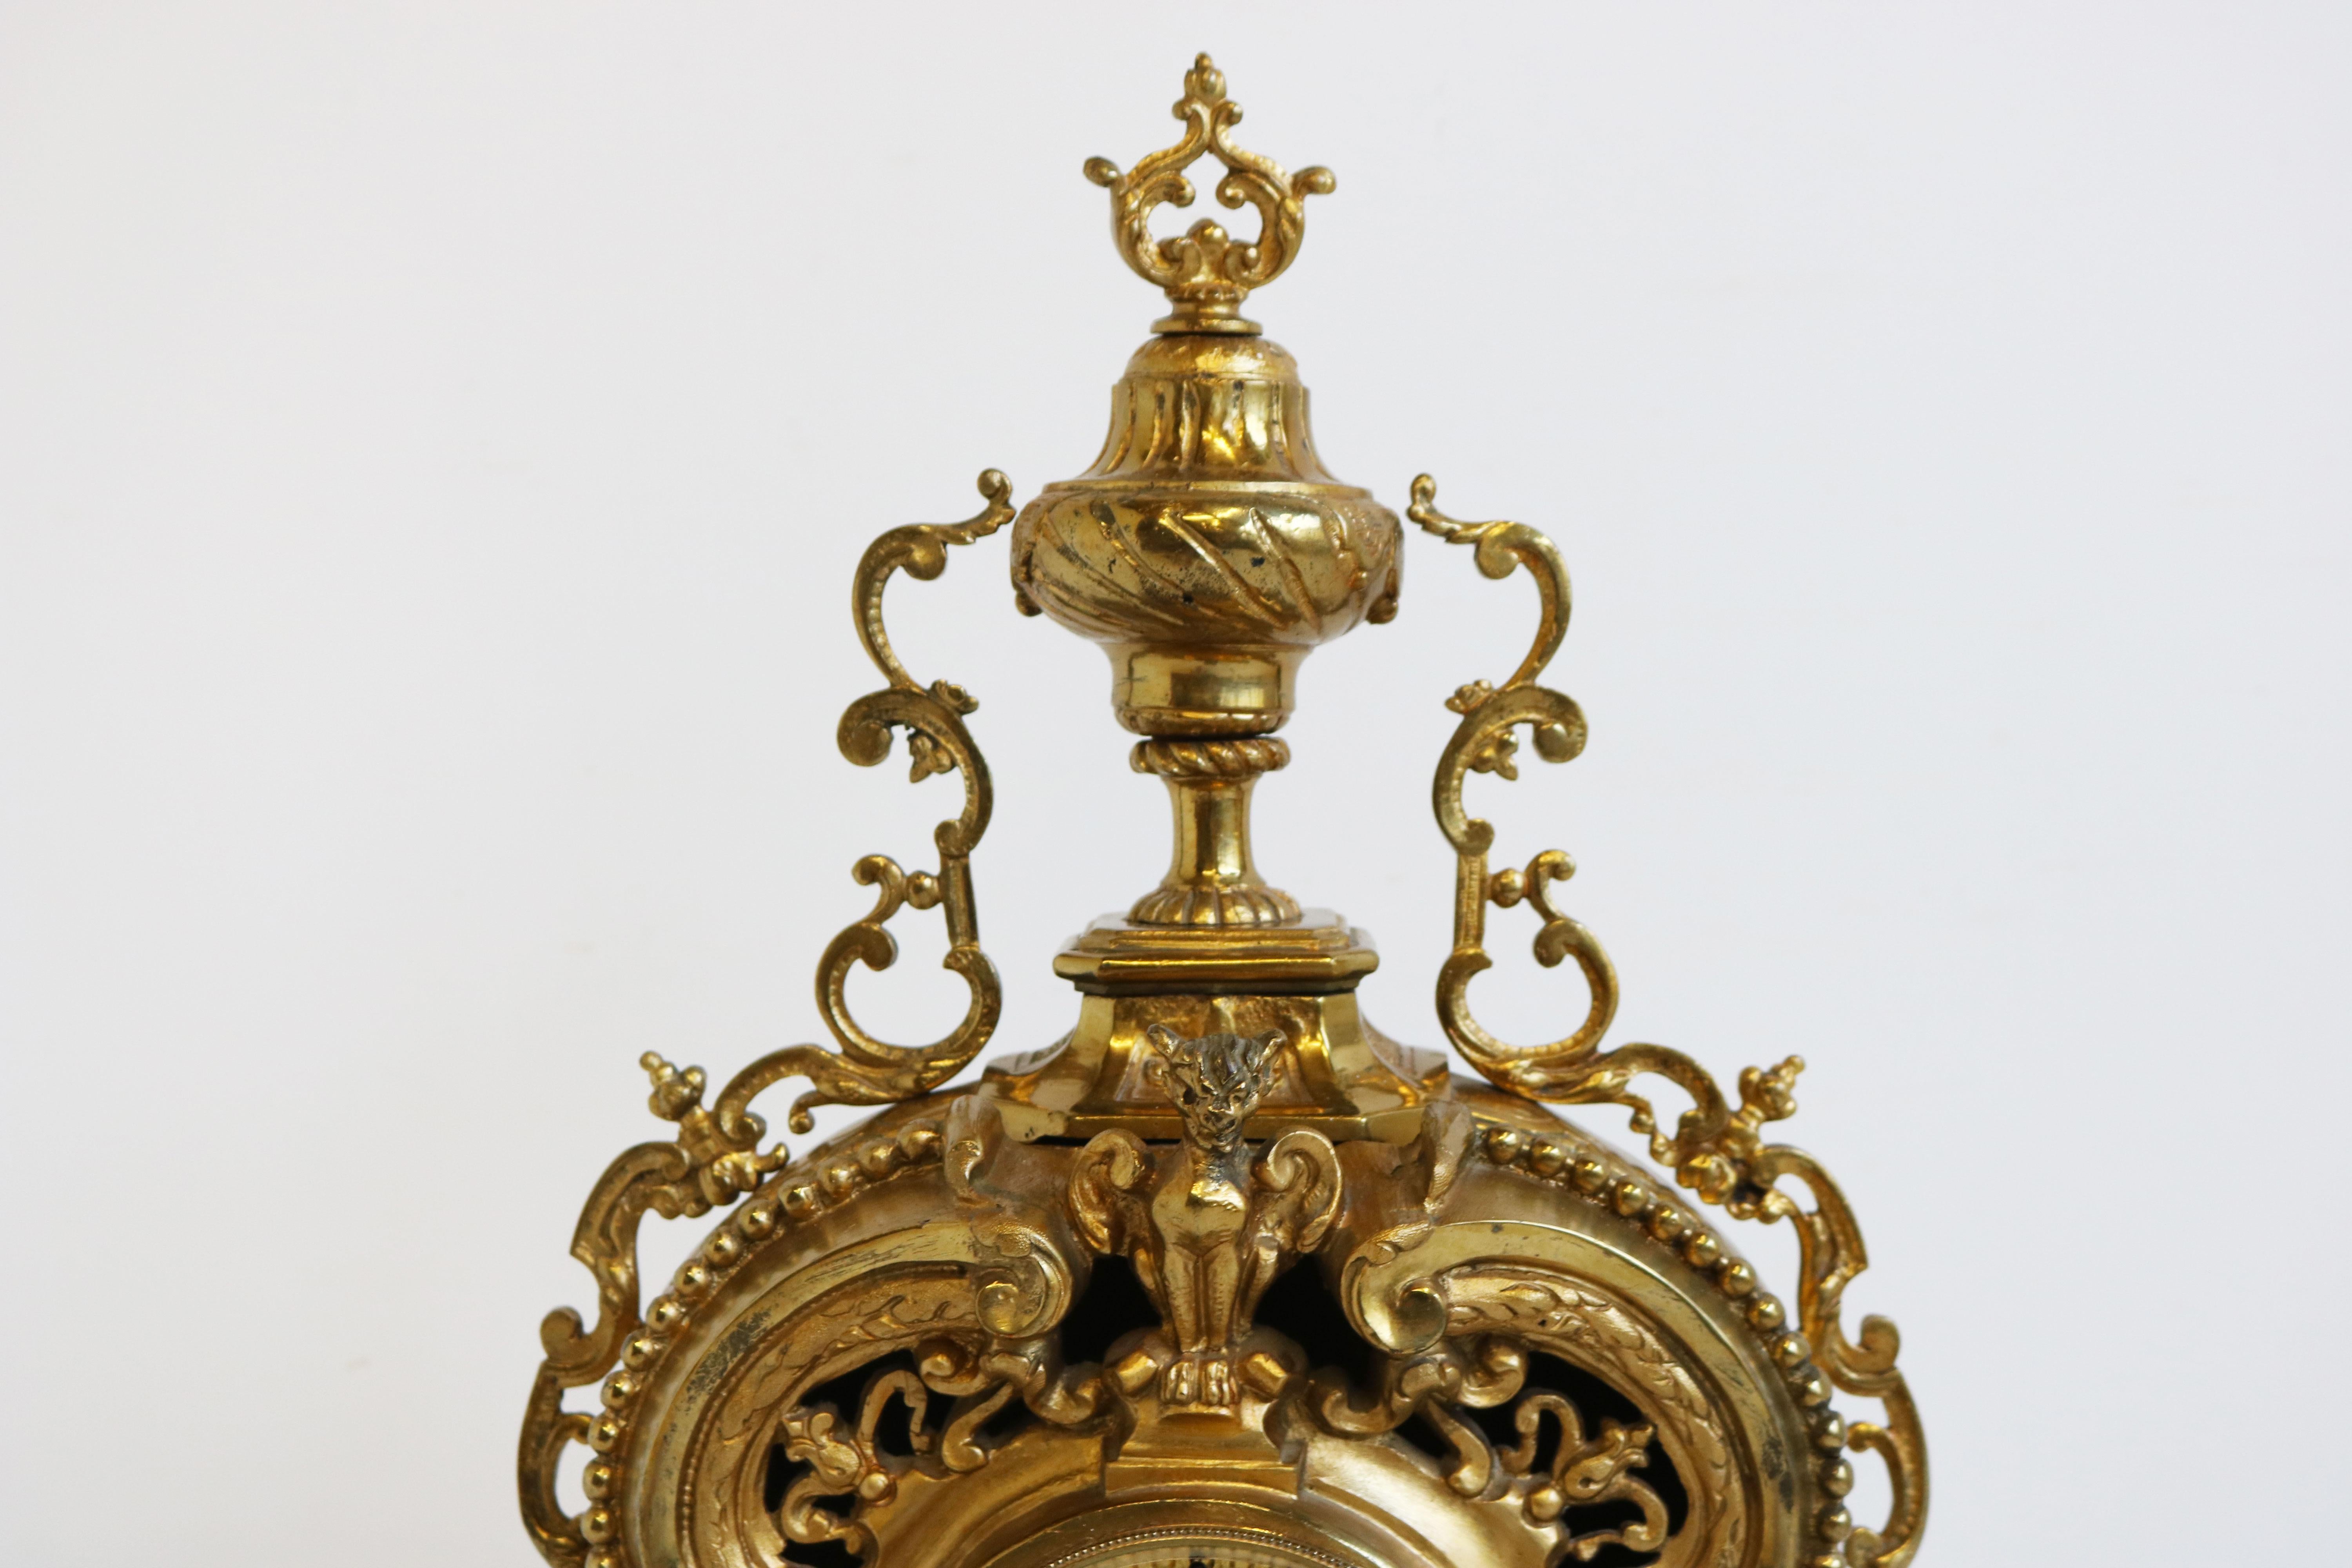 Huge Antique French Gilt Bronze Classical Clock Set 19th century Acanthus leaves For Sale 6